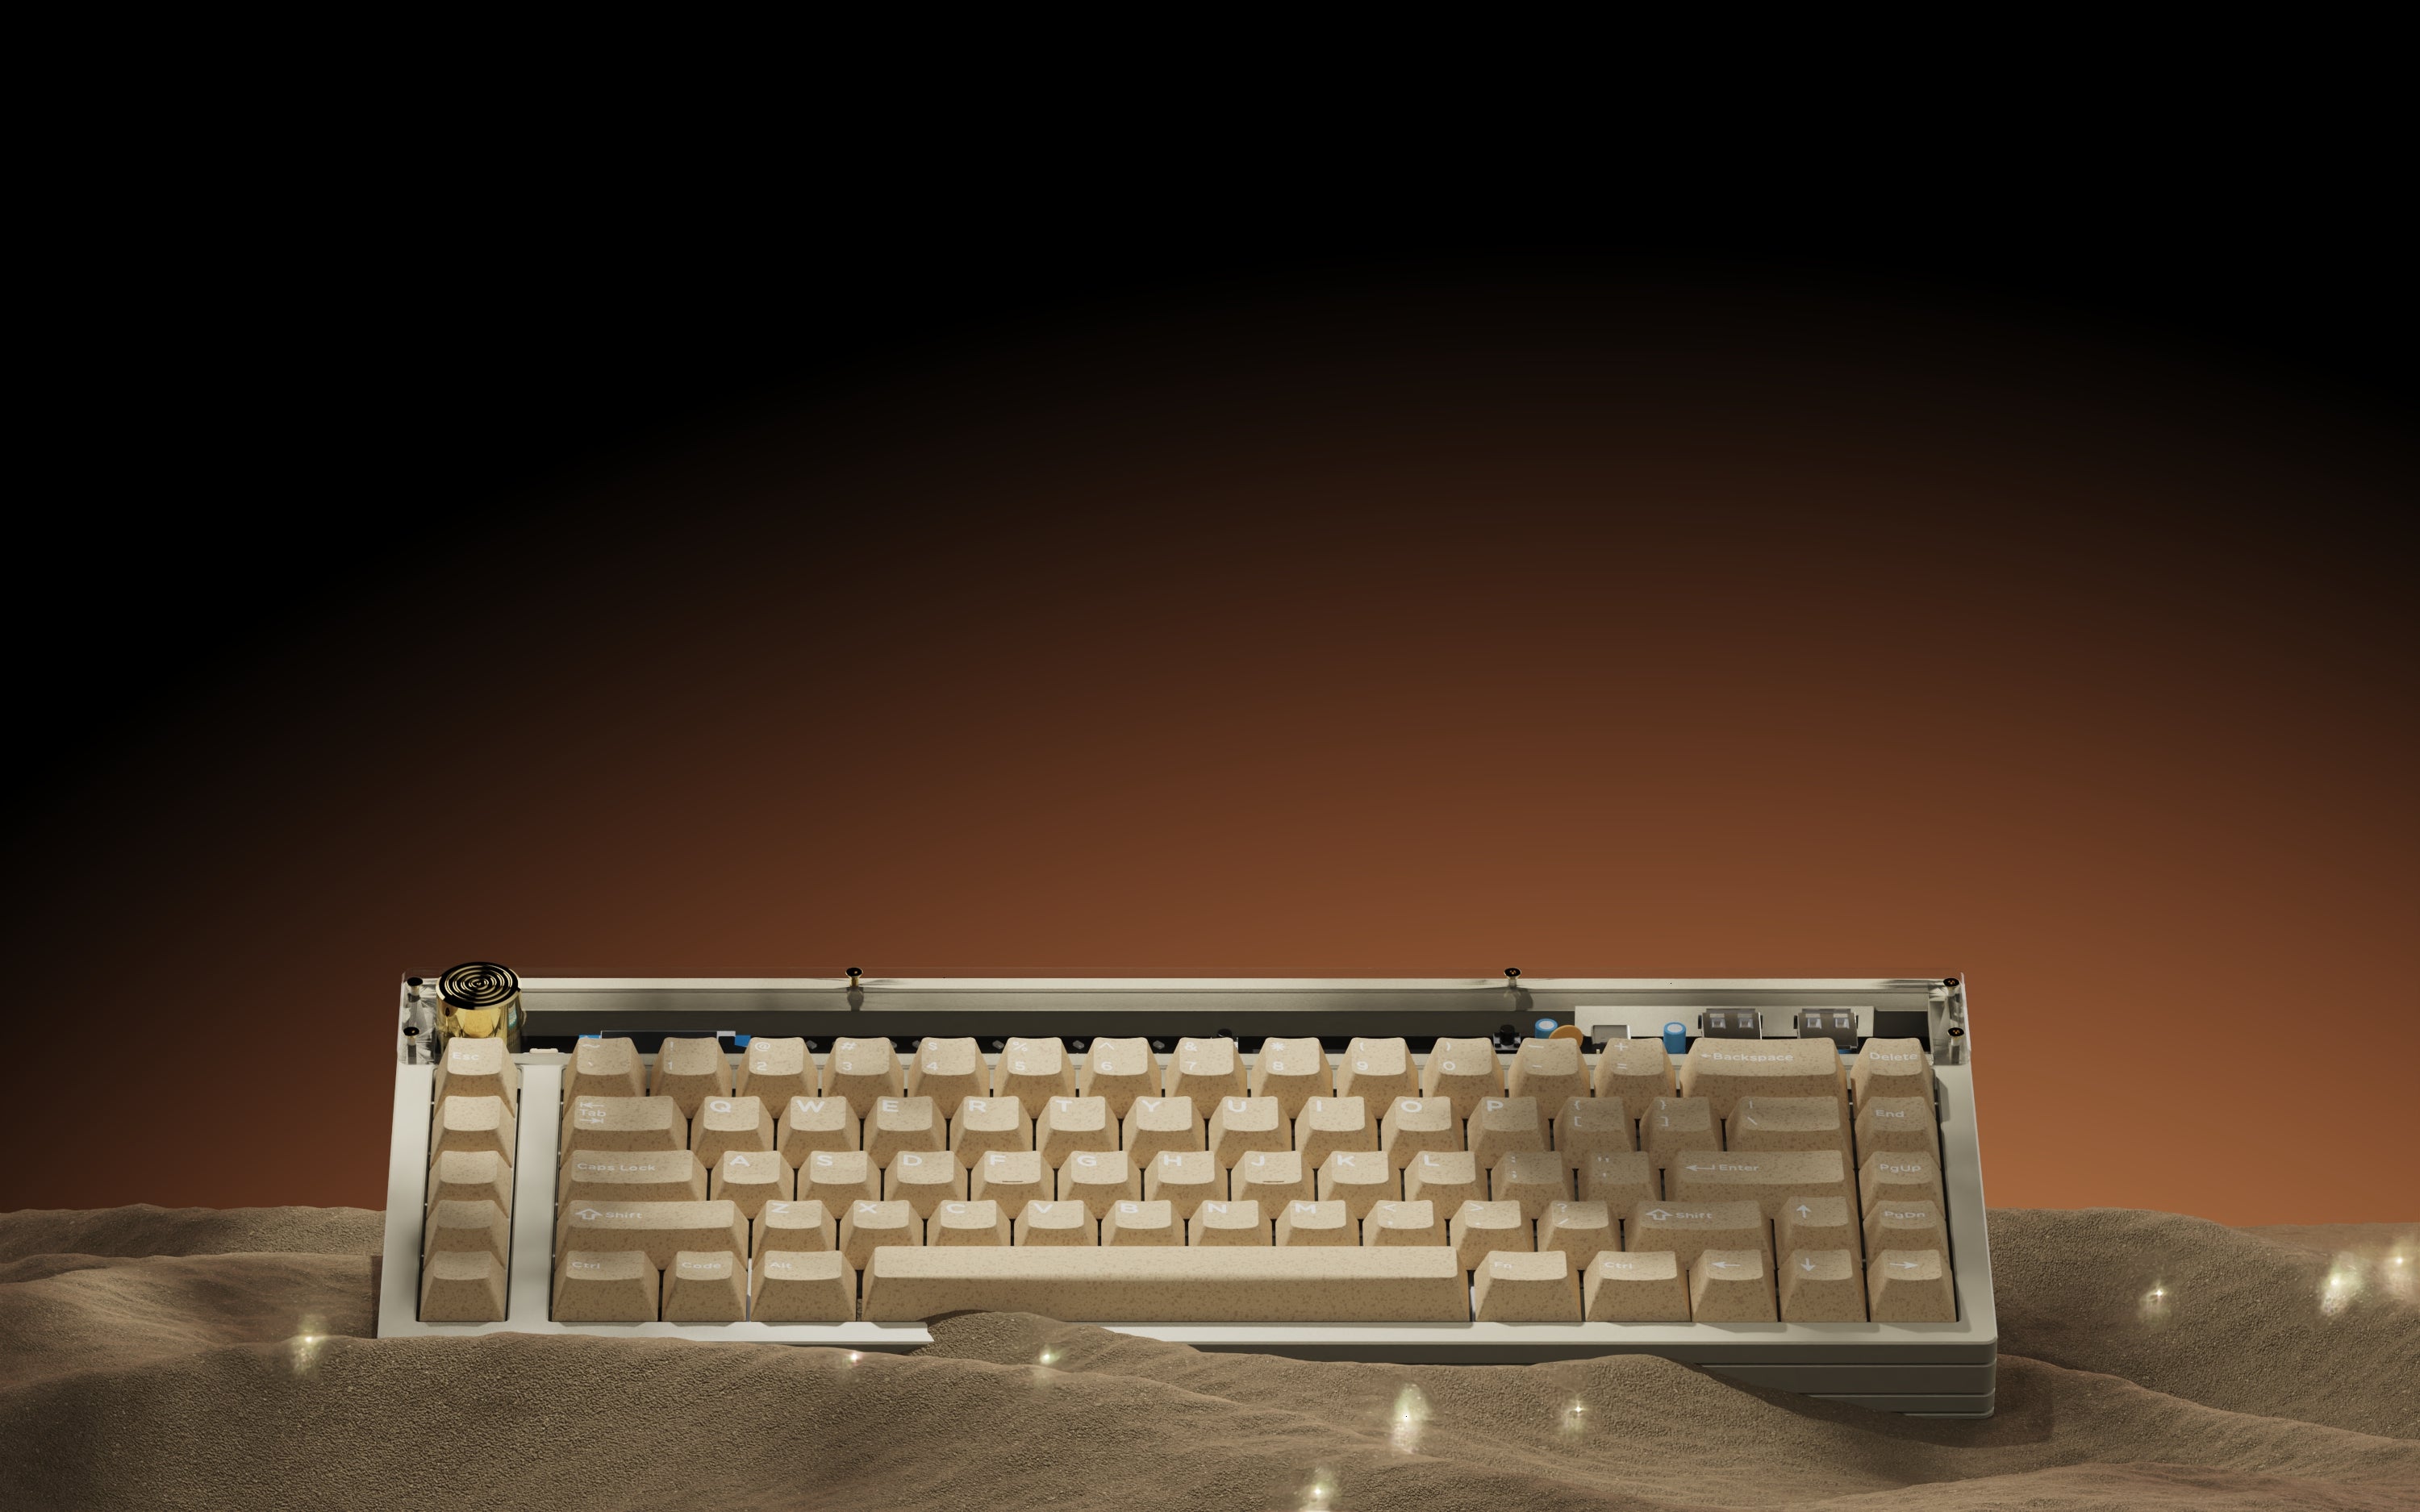 [Pre-order] GMK CYL Dune Keycaps